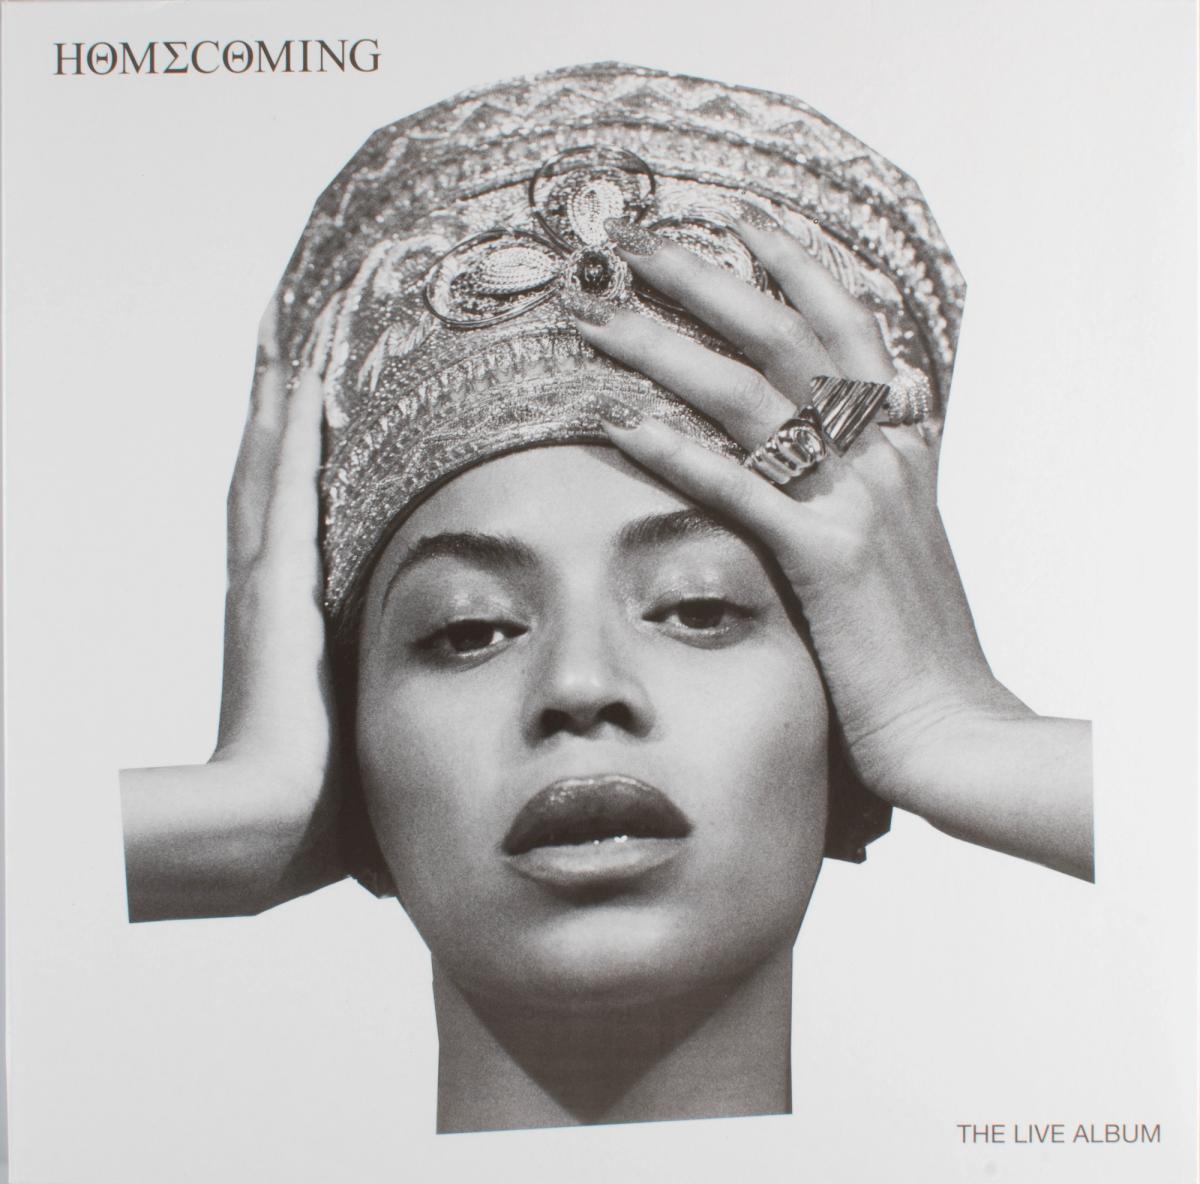 Record cover of Beyoncé's album Homecoming 

© Photo and collection RMO, Columbia Records, 2020